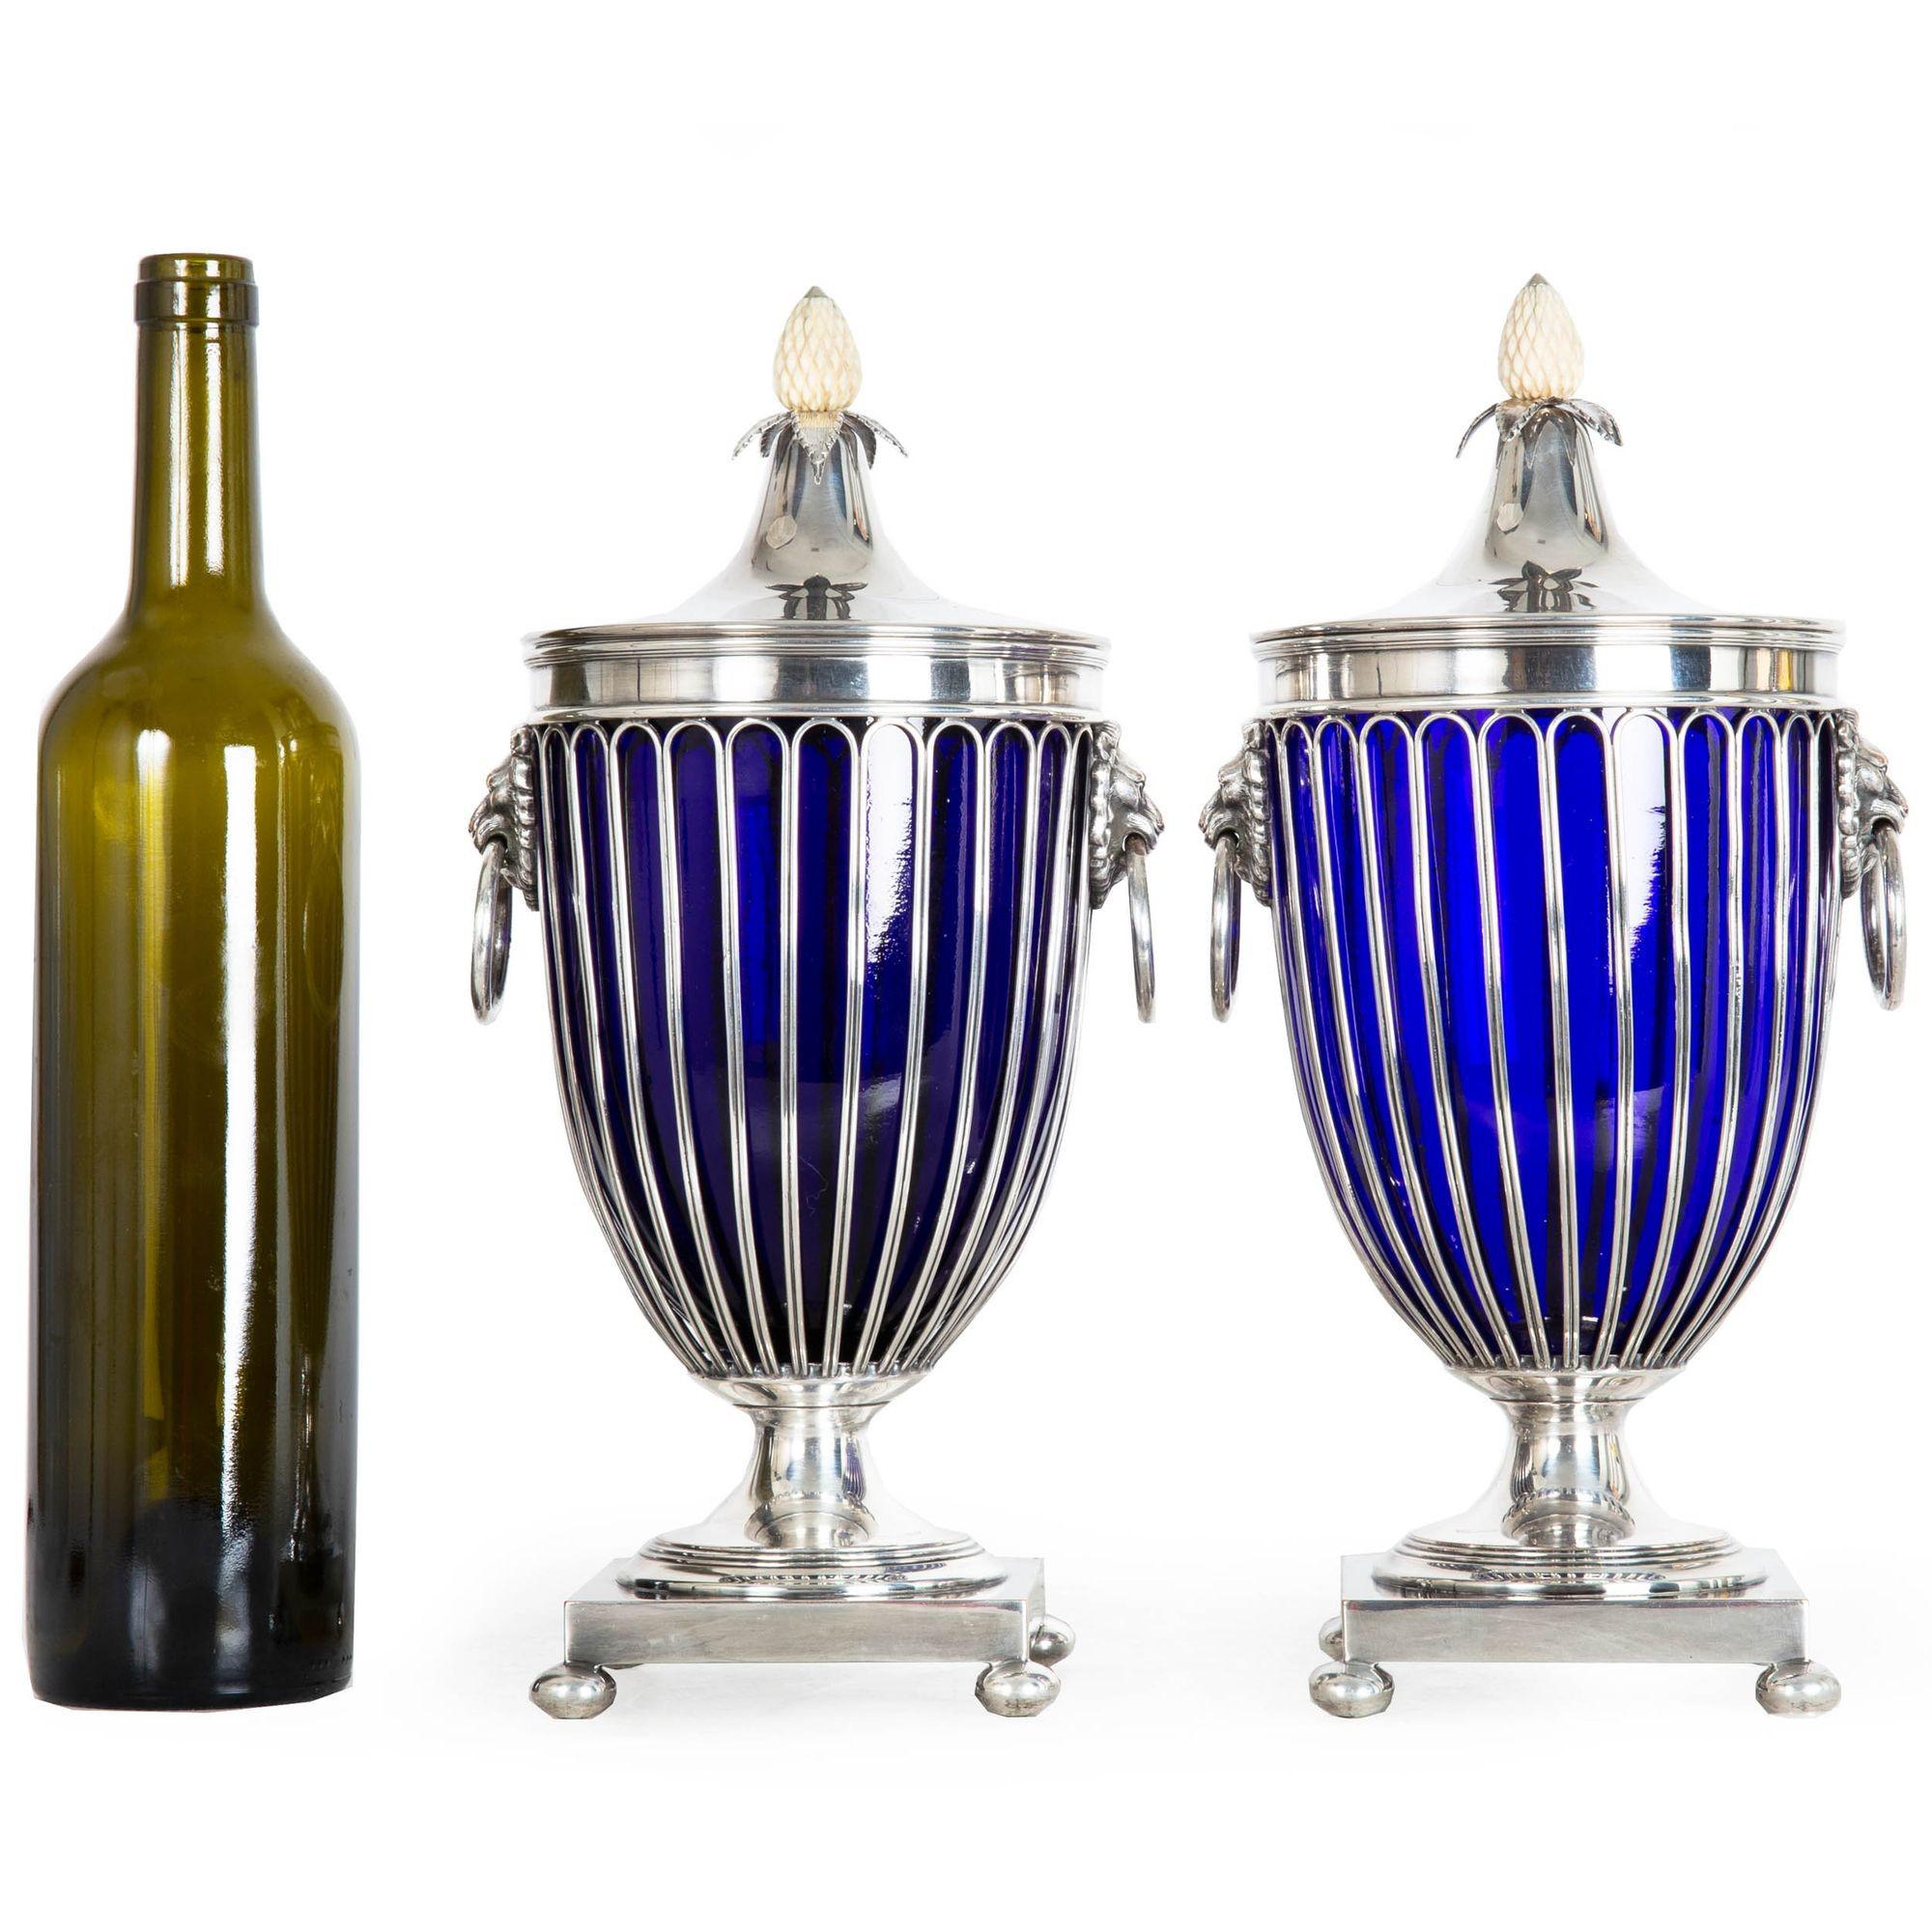 20th Century Pair of English Sheffield Silver Plated Cobalt Blue Glass Urns by Barker-Ellis For Sale